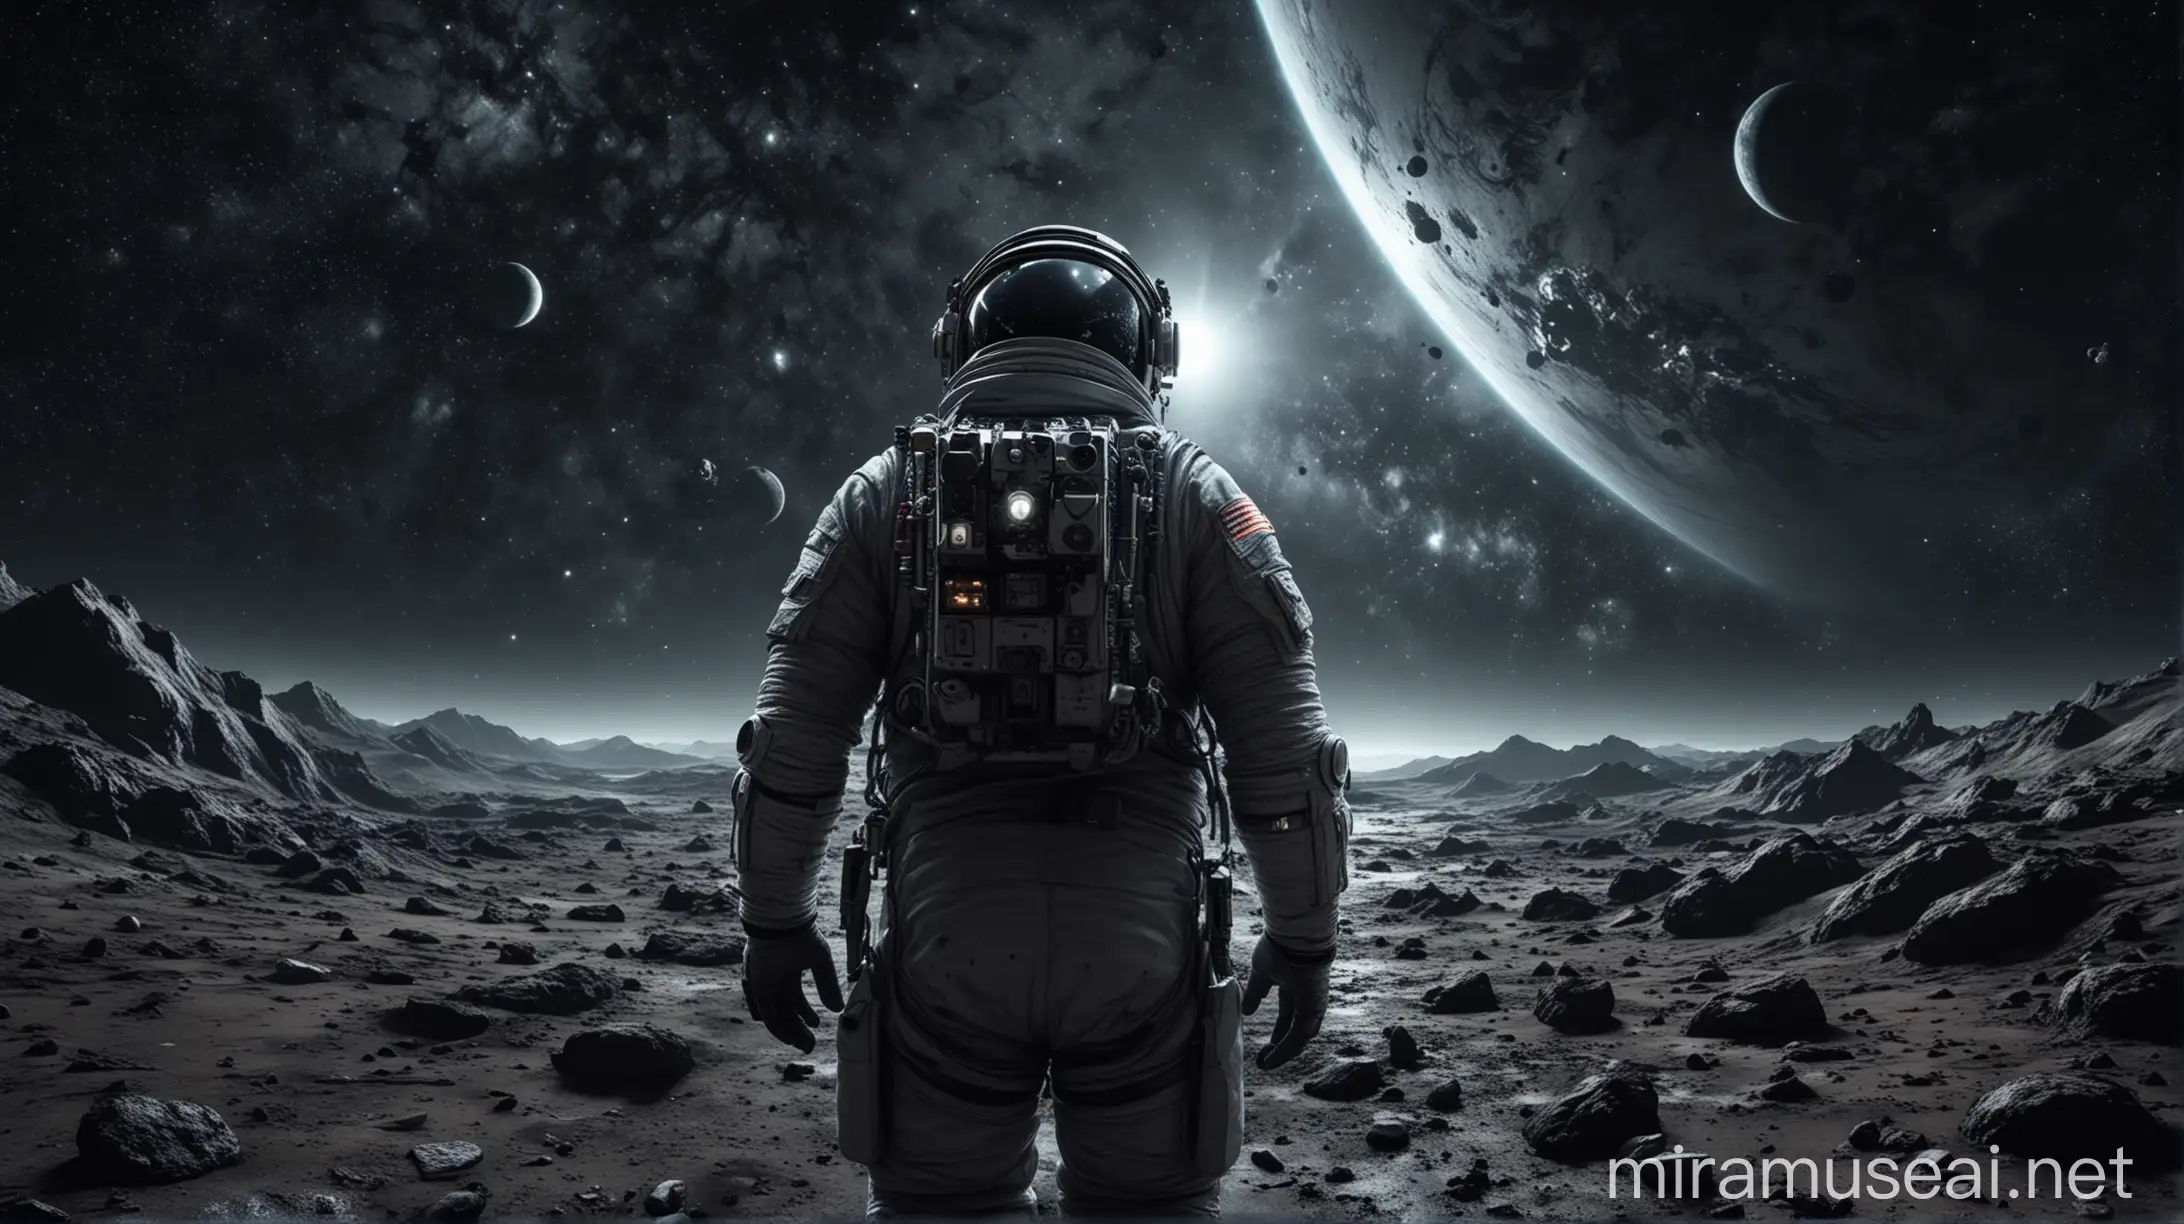 Astronaut on an imaginary planet, picture from behind, Astronaut is far away, stars in dark sky, dead planet, alone, 8k, ultra realistic, highly detailed